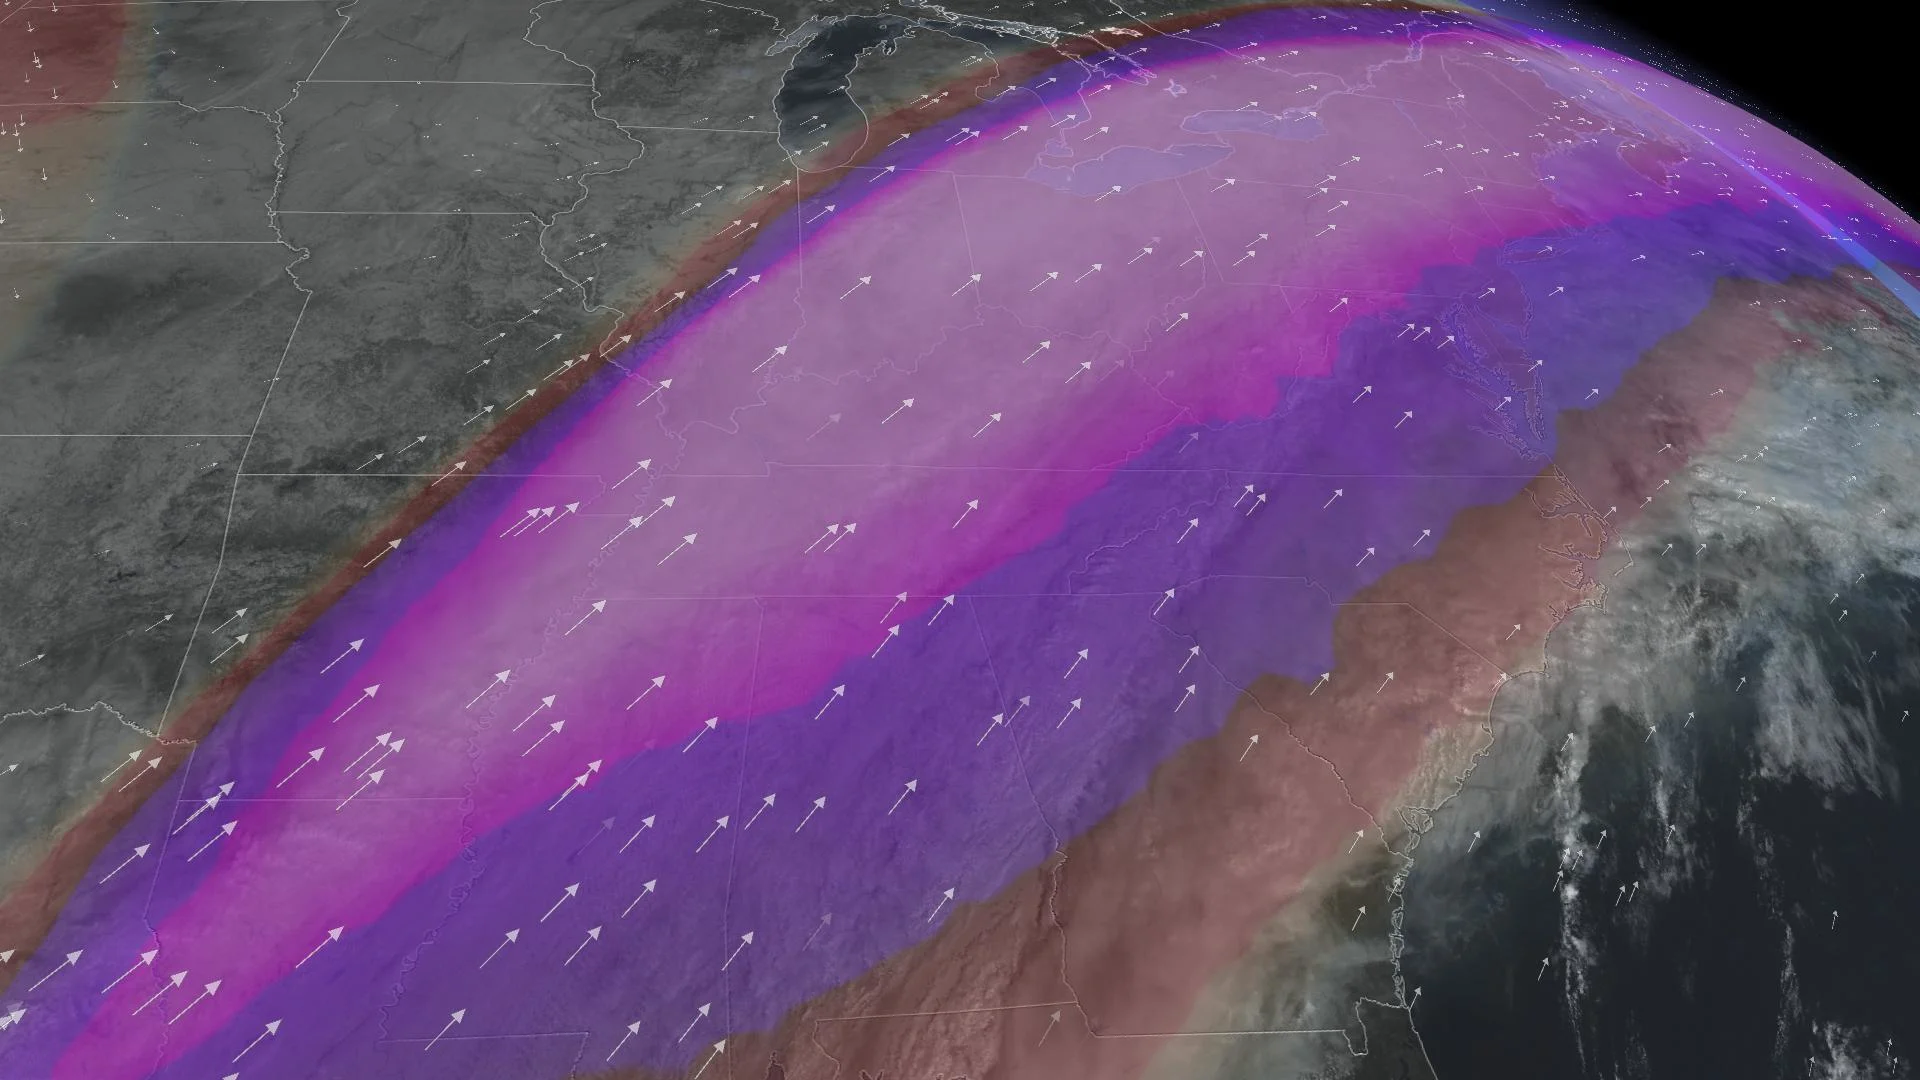 'Severe' turbulence captured over the Great Lakes Thursday